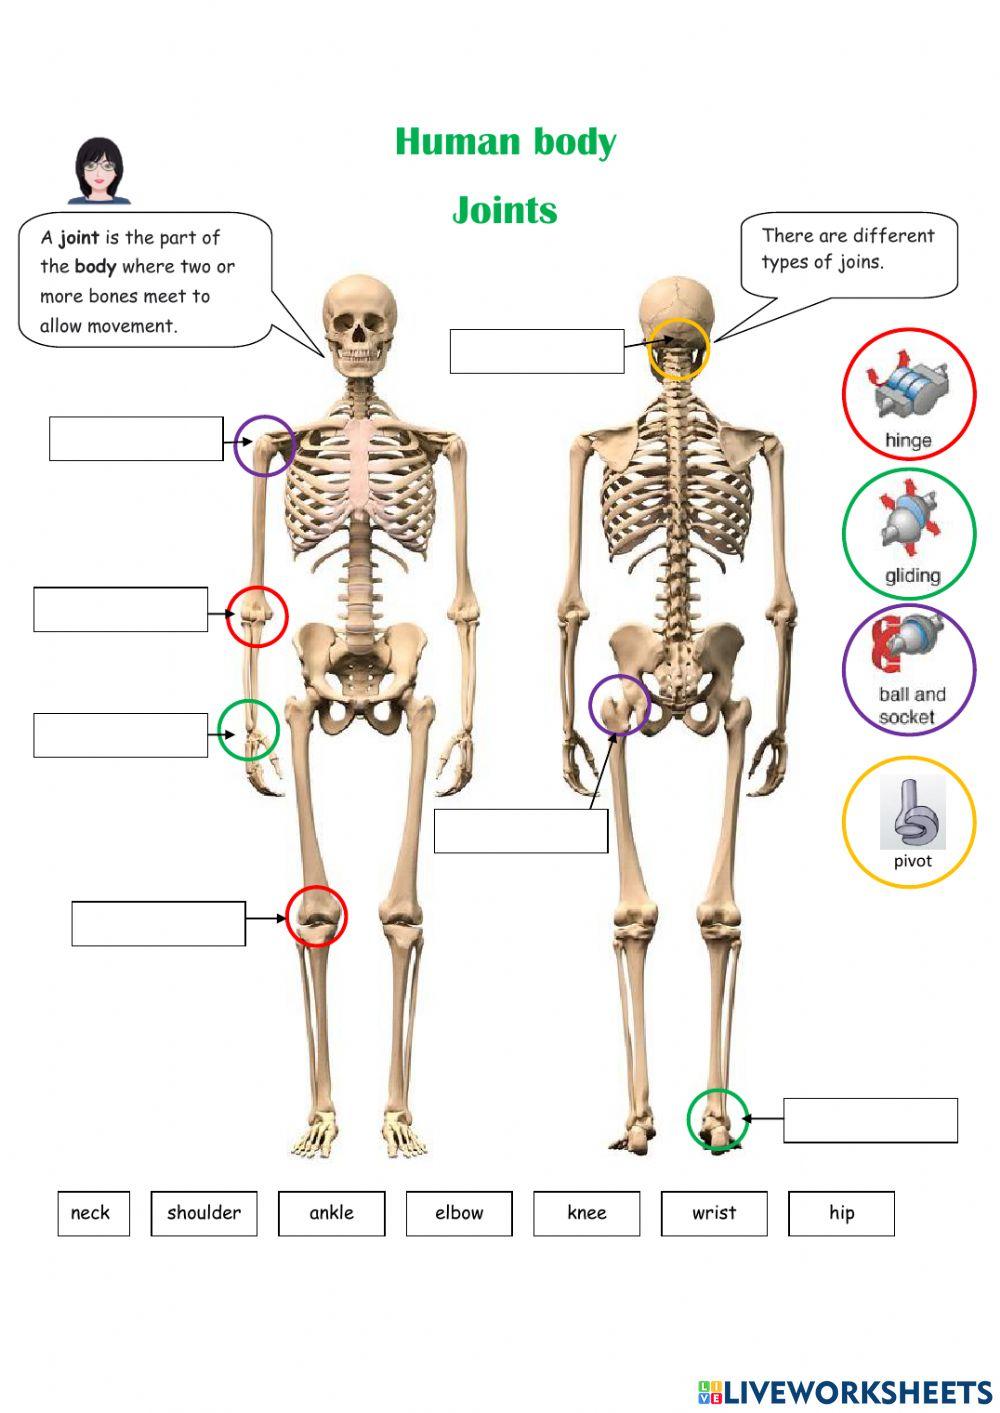 Human joints